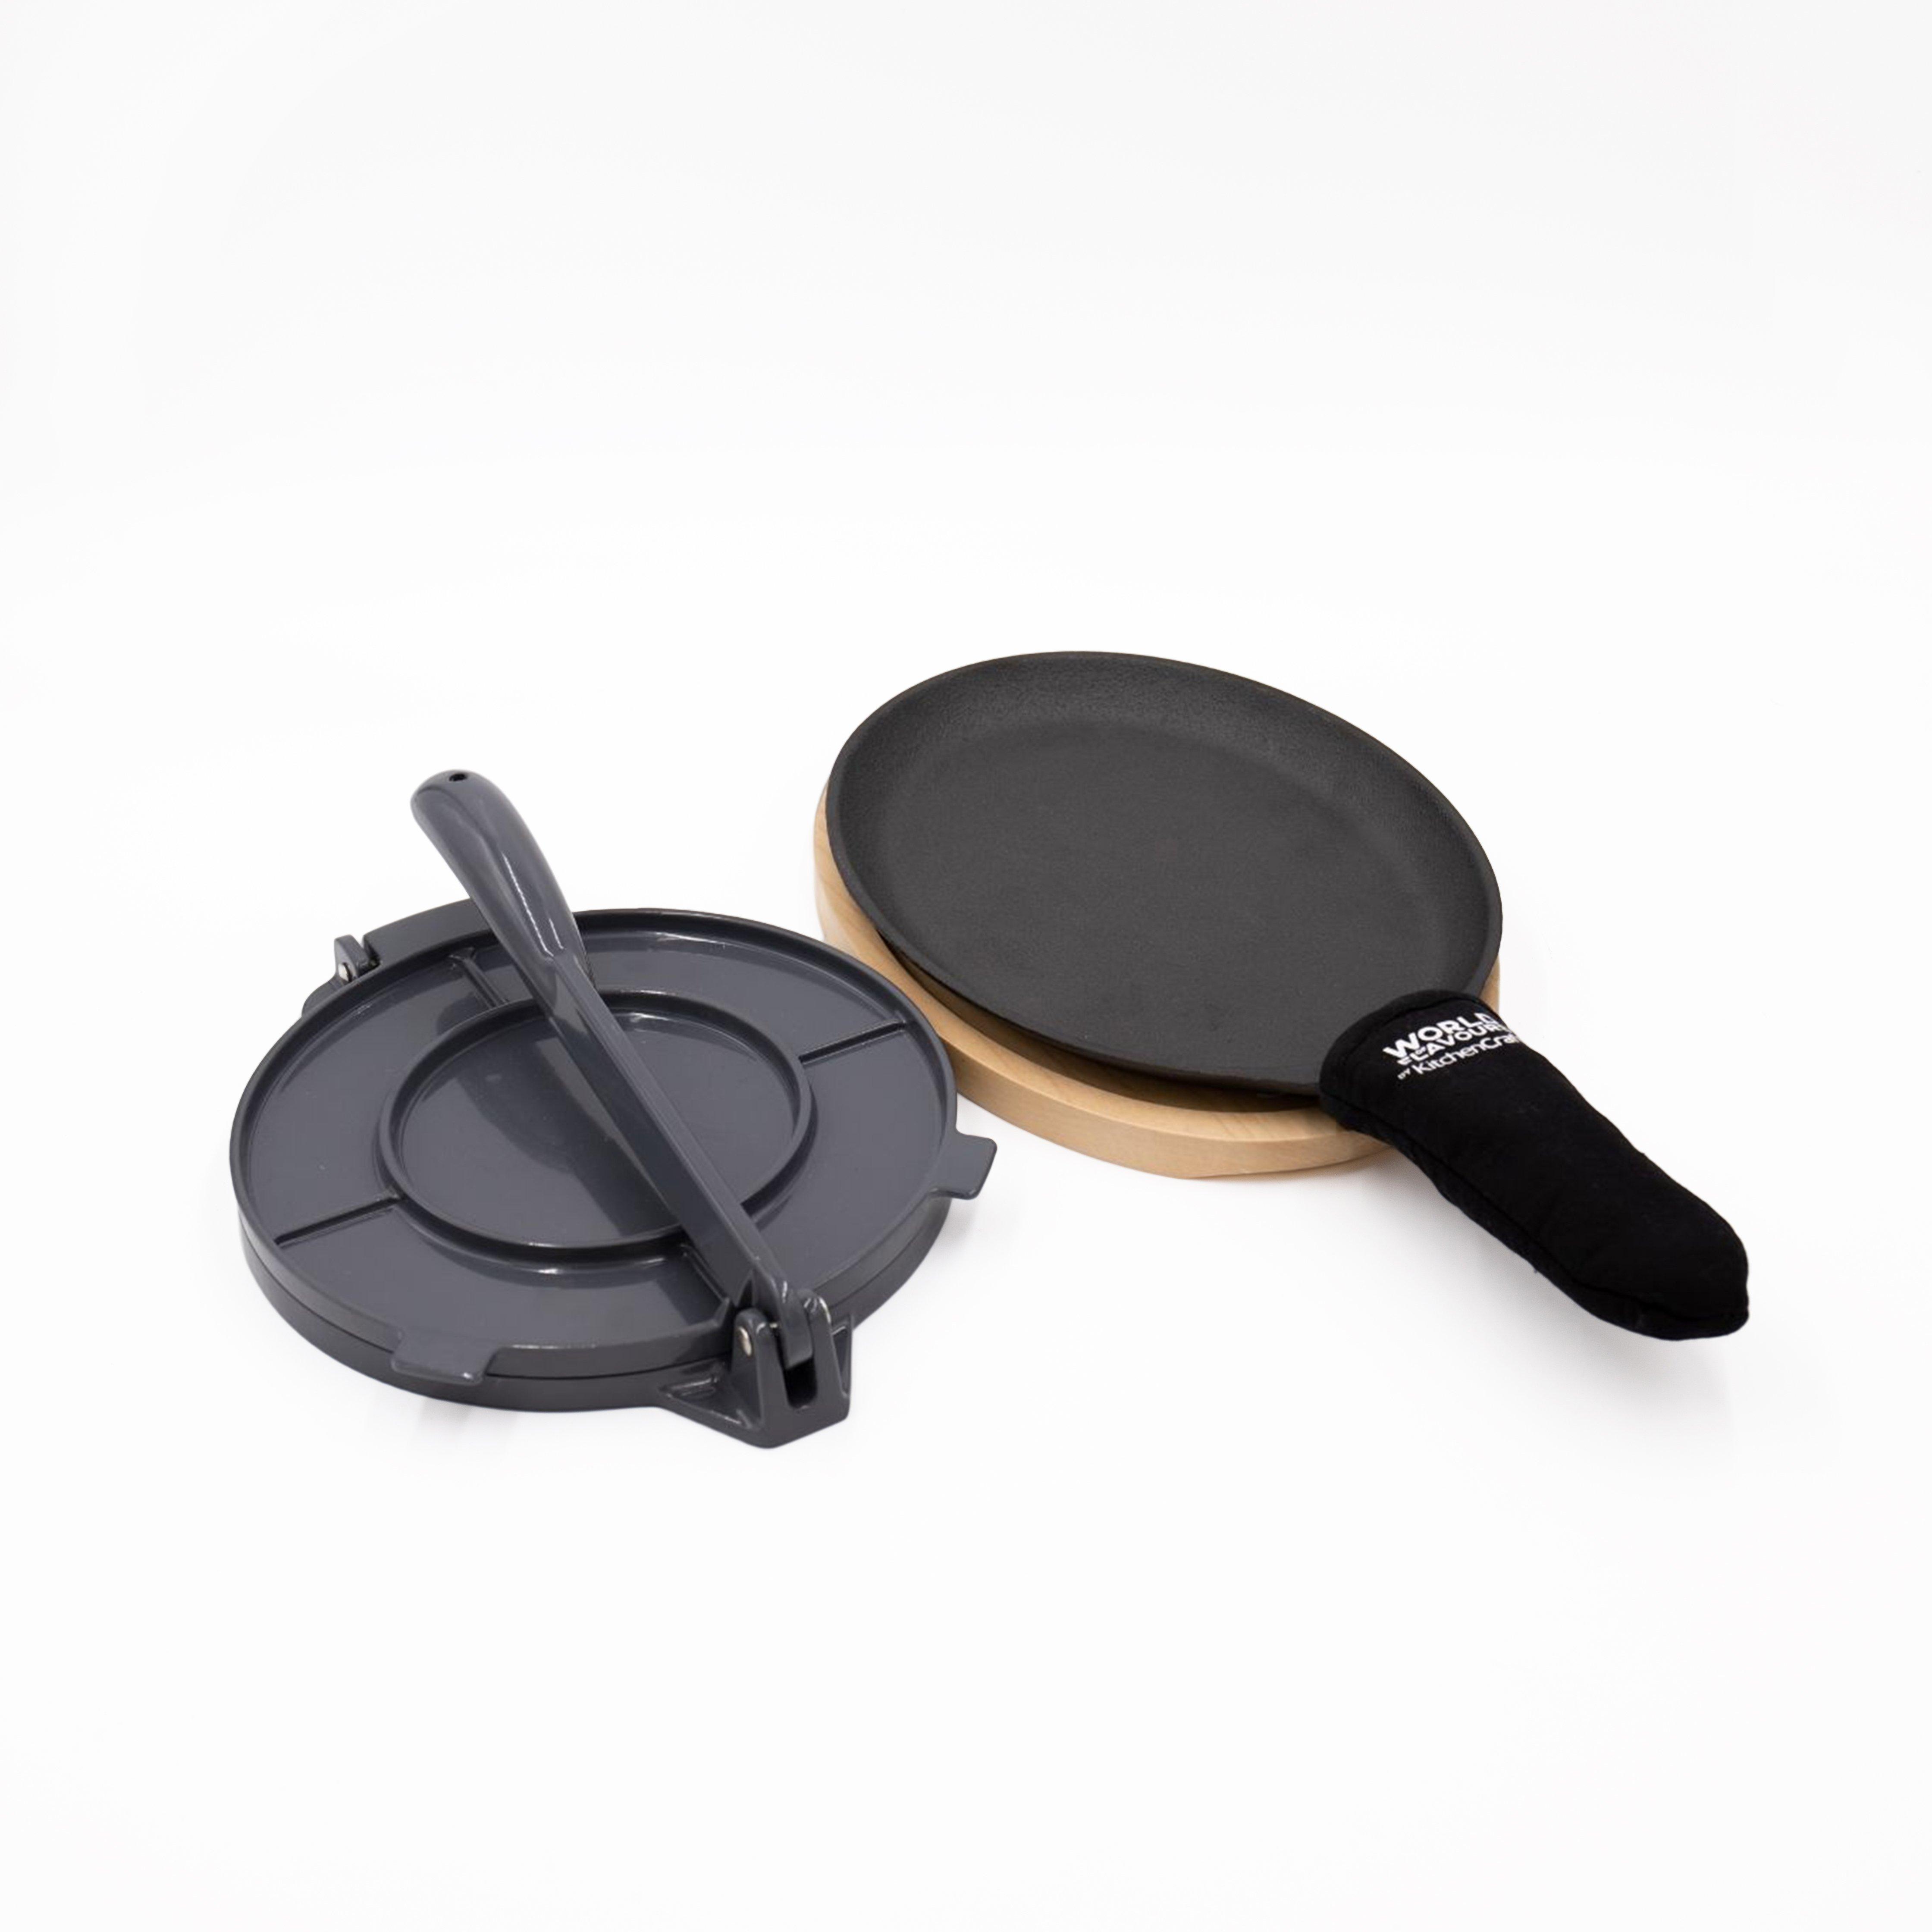 2pc Mexican Cooking Set with Tortilla Press and Cast Iron Fajita Sizzler